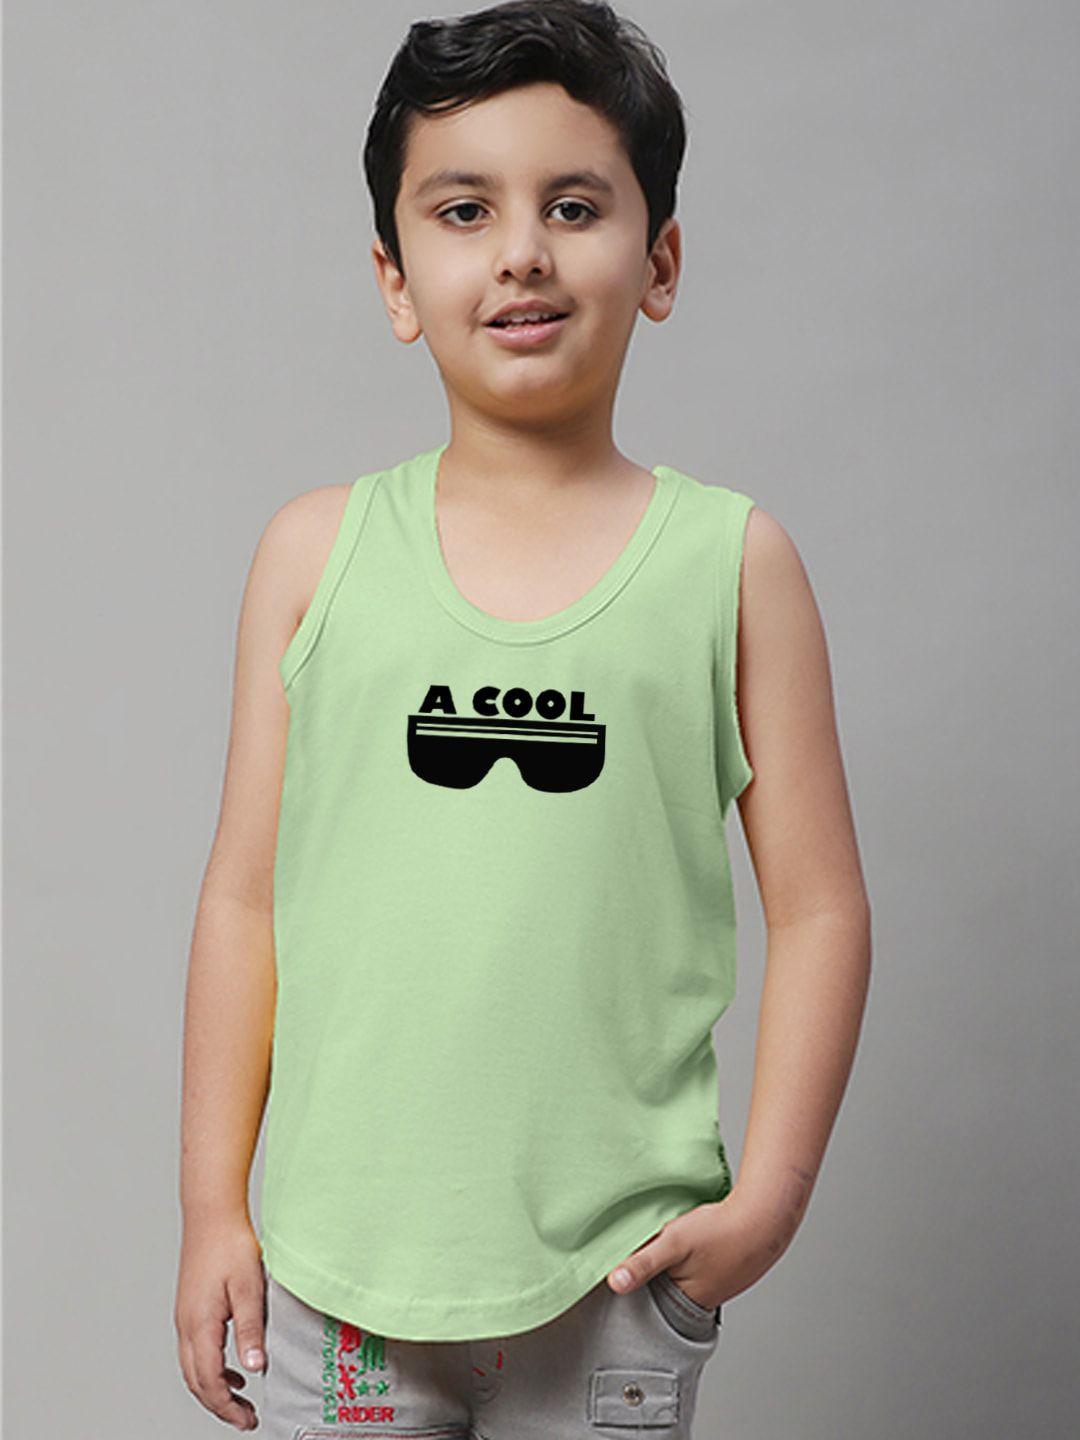 friskers boys printed pure cotton innerwear vests